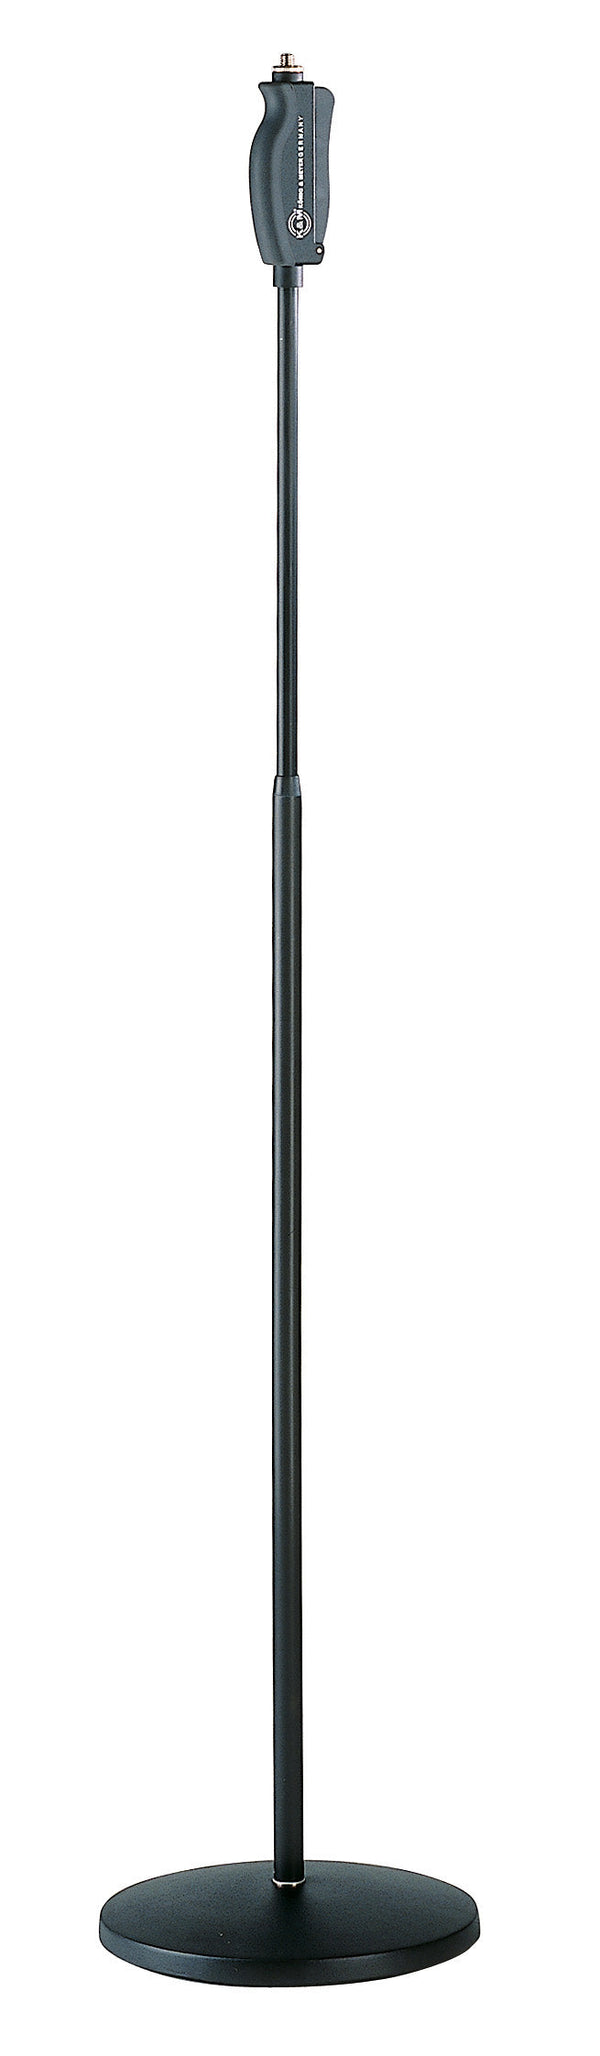 K&M Microphones K&M Round Base Straight Mic Stand with One-Handed Clutch, and Matte Black Finish 26085-500-55 Buy on Feesheh